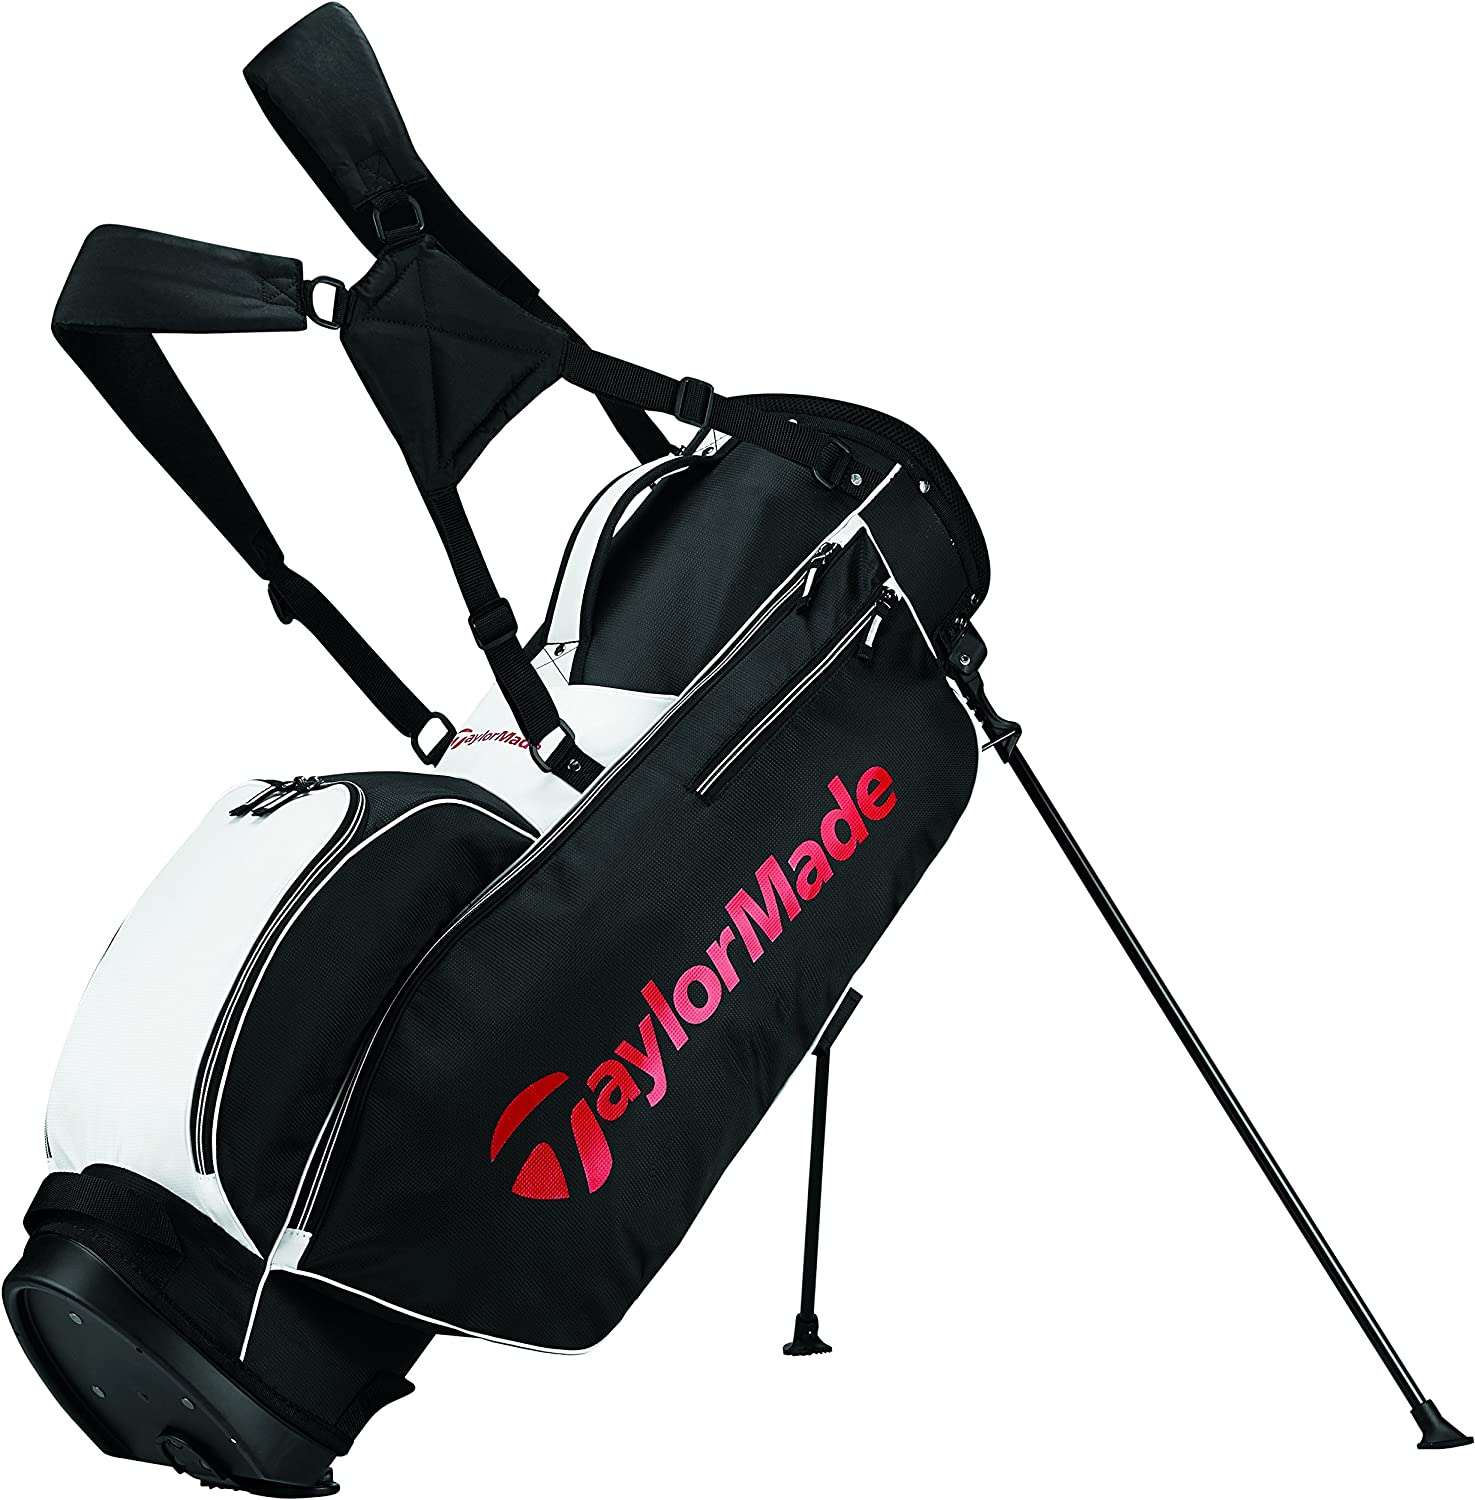 6 Golf Bags for Beginners, Best Value: 2020 Edition 8